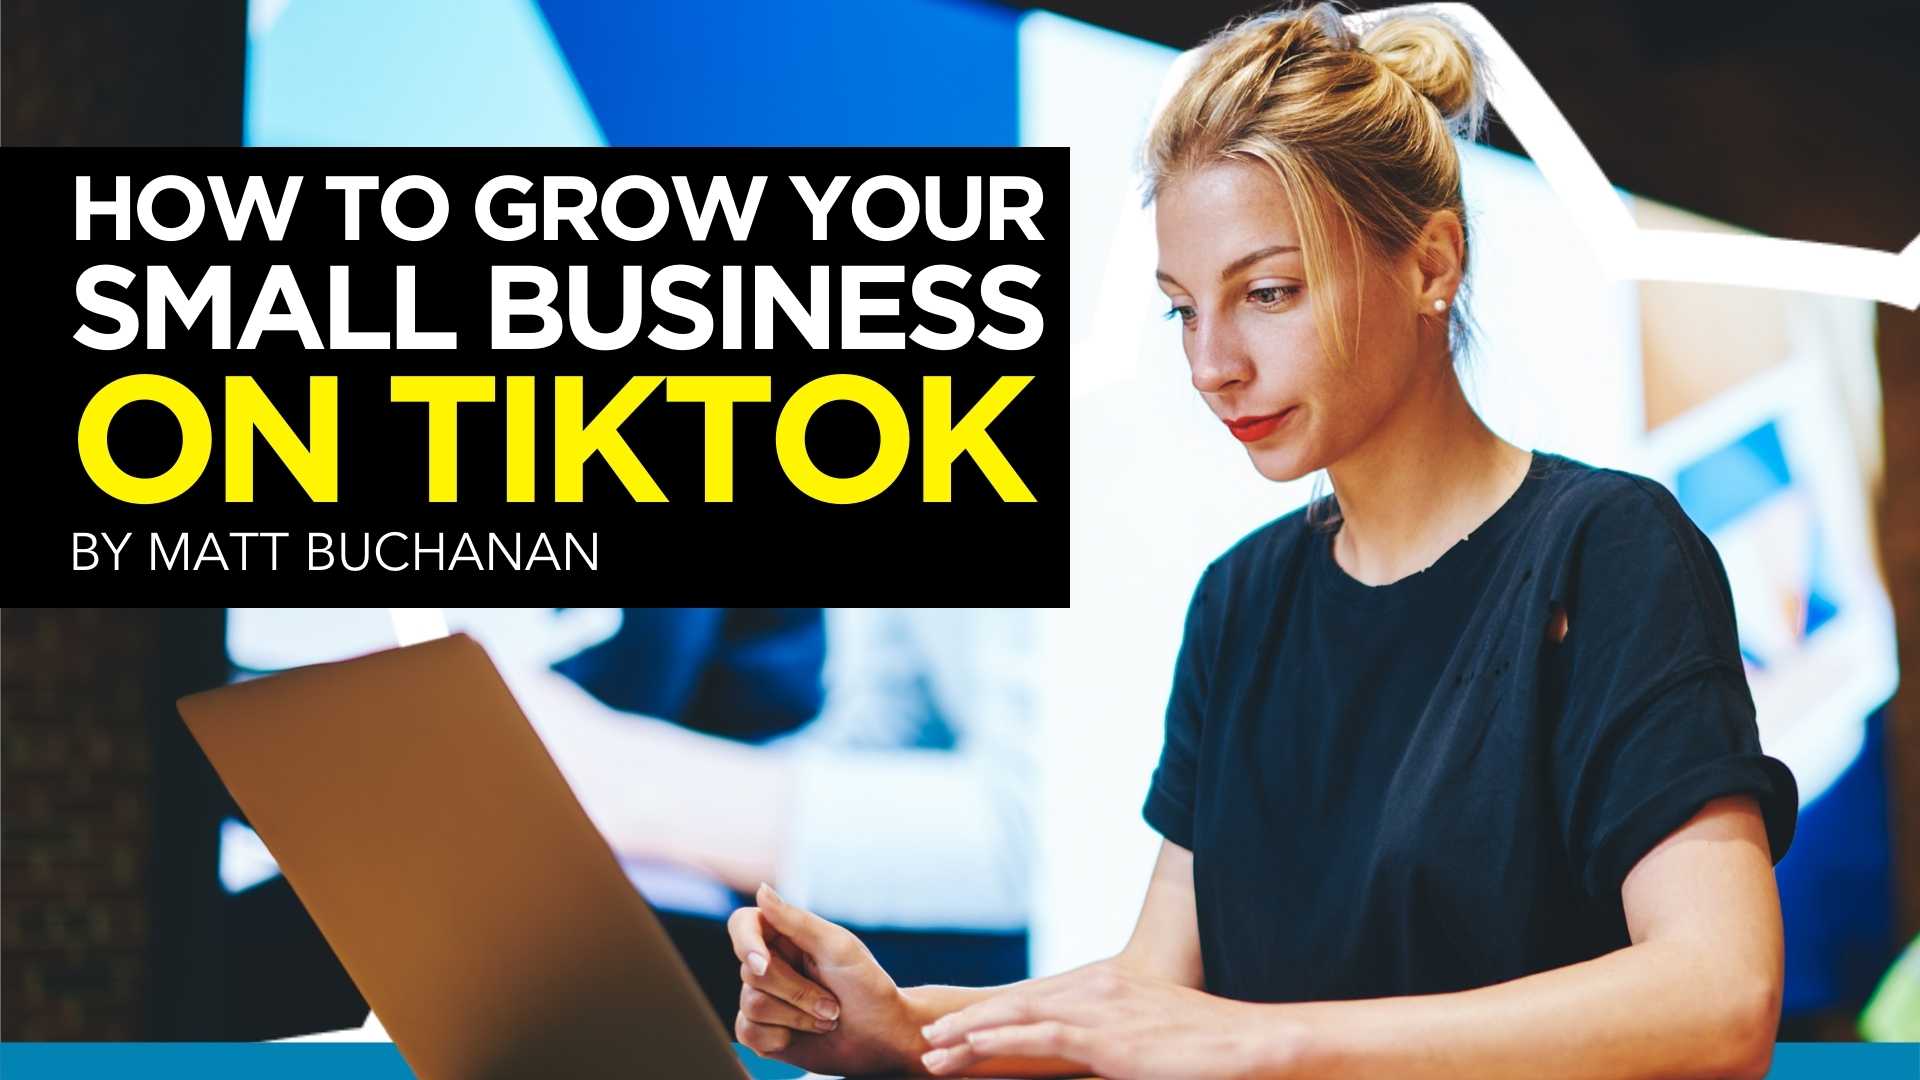 How to Grow Your Small Business On TikTok